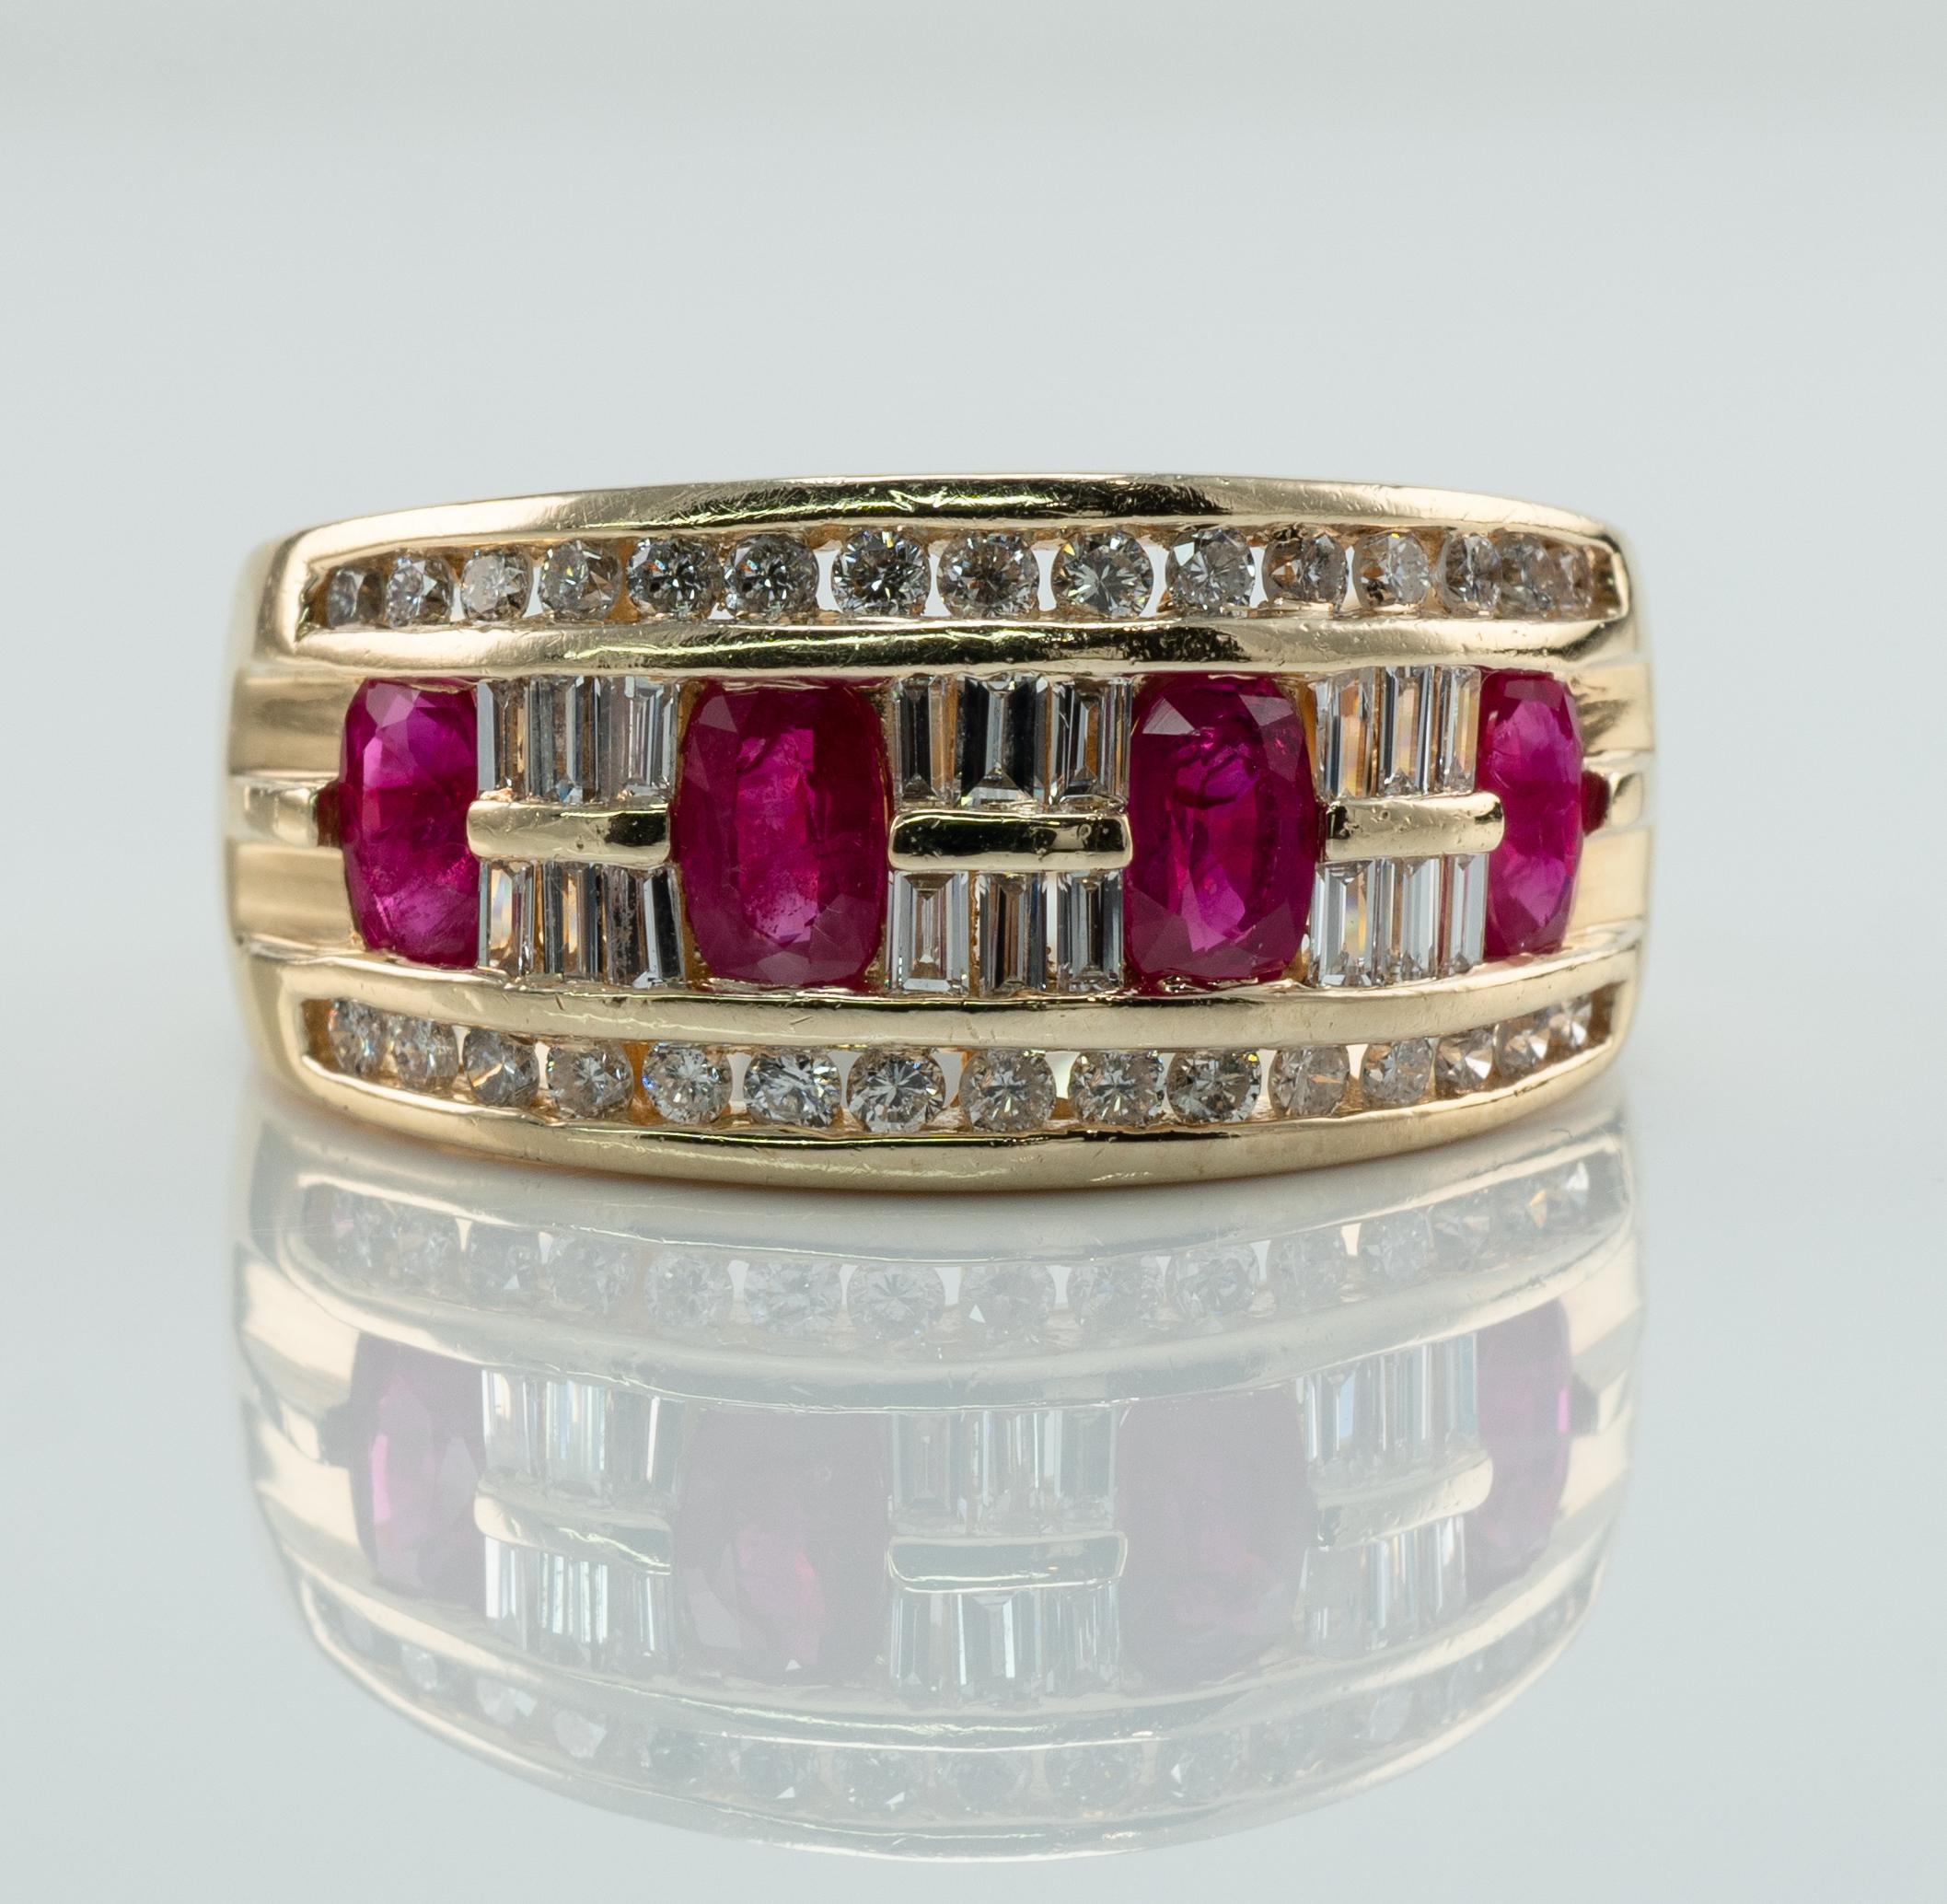 Natural Diamond Ruby Ring 14K Gold Estate Band BH Effy

This absolutely stunning estate ring is finely crafted in solid 14K Yellow gold and set with Natural Earth-mined Ruby and diamonds. 
4 Rubies total 1.12 carat. These gems are clean and